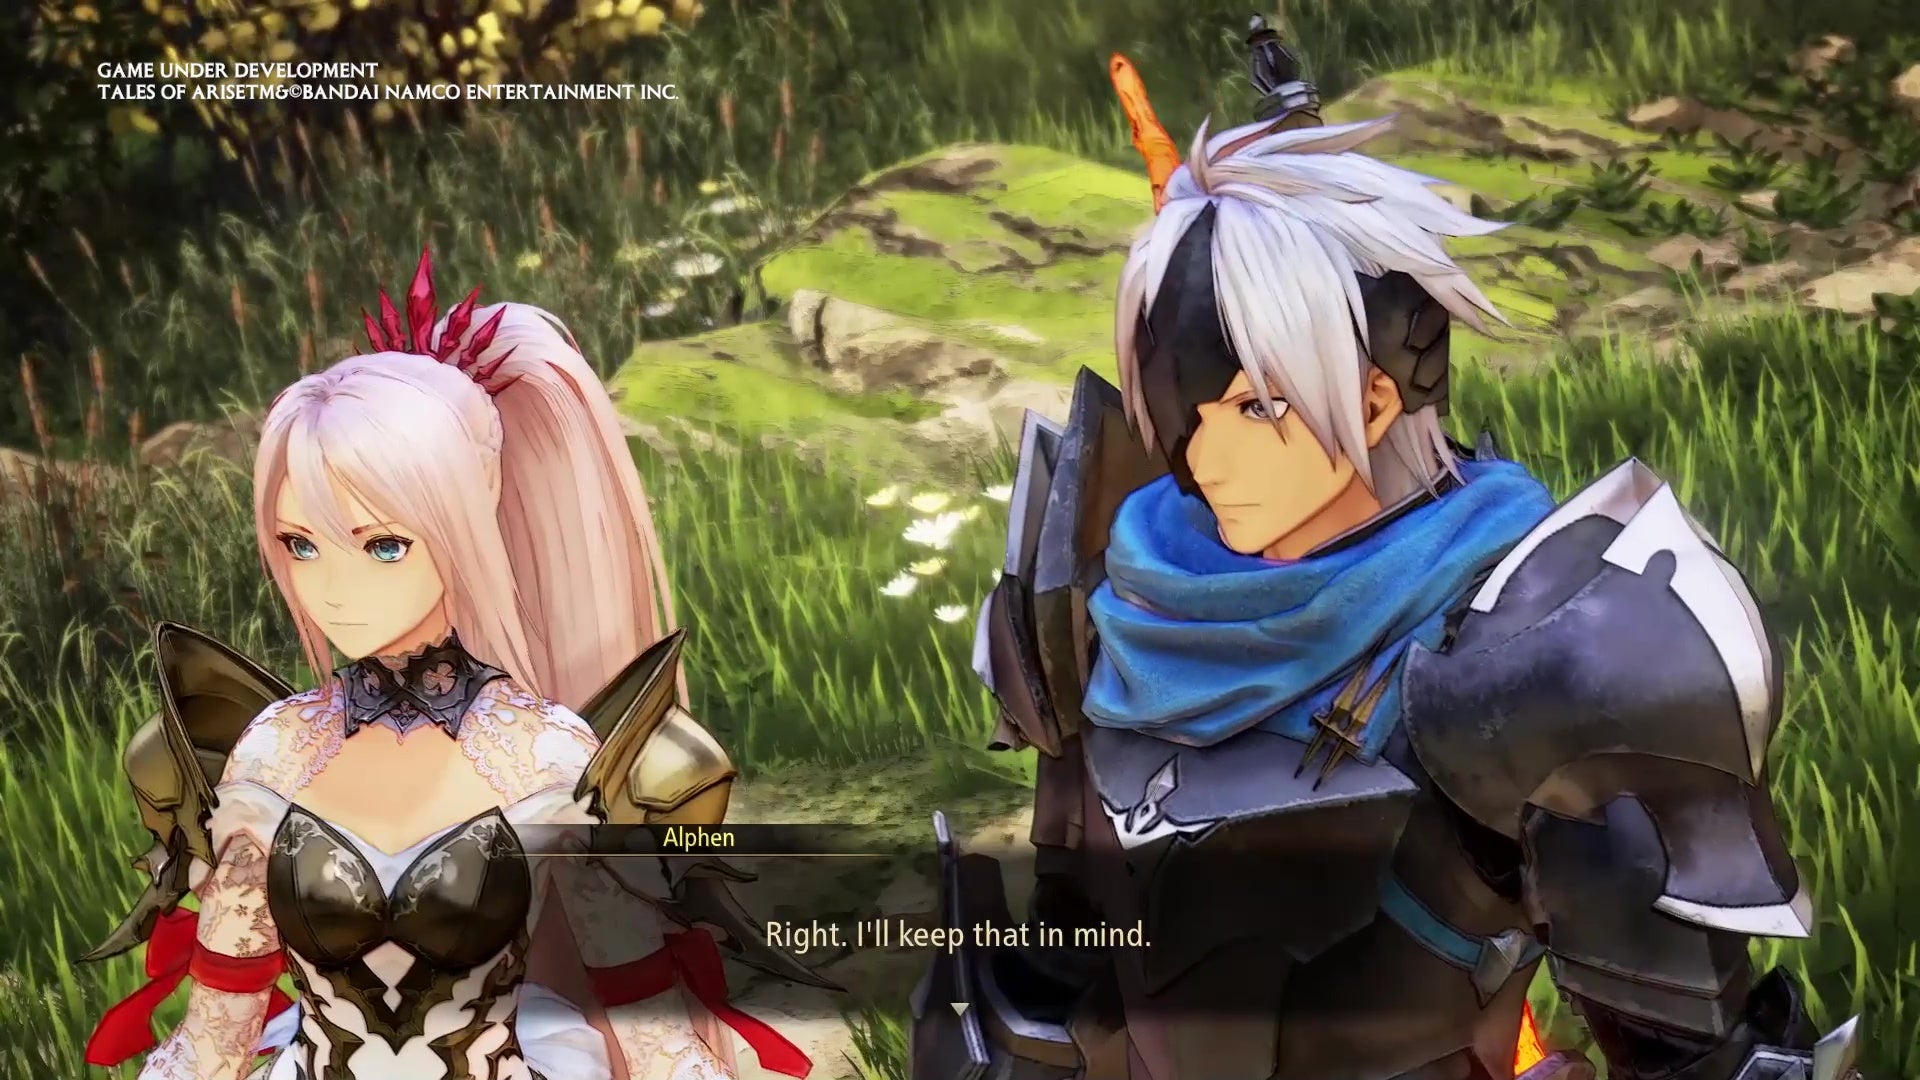 An image from Tales Of Arise which shows Alphen in conversation with Shionne. He says, "Right, I'll keep that in mind".